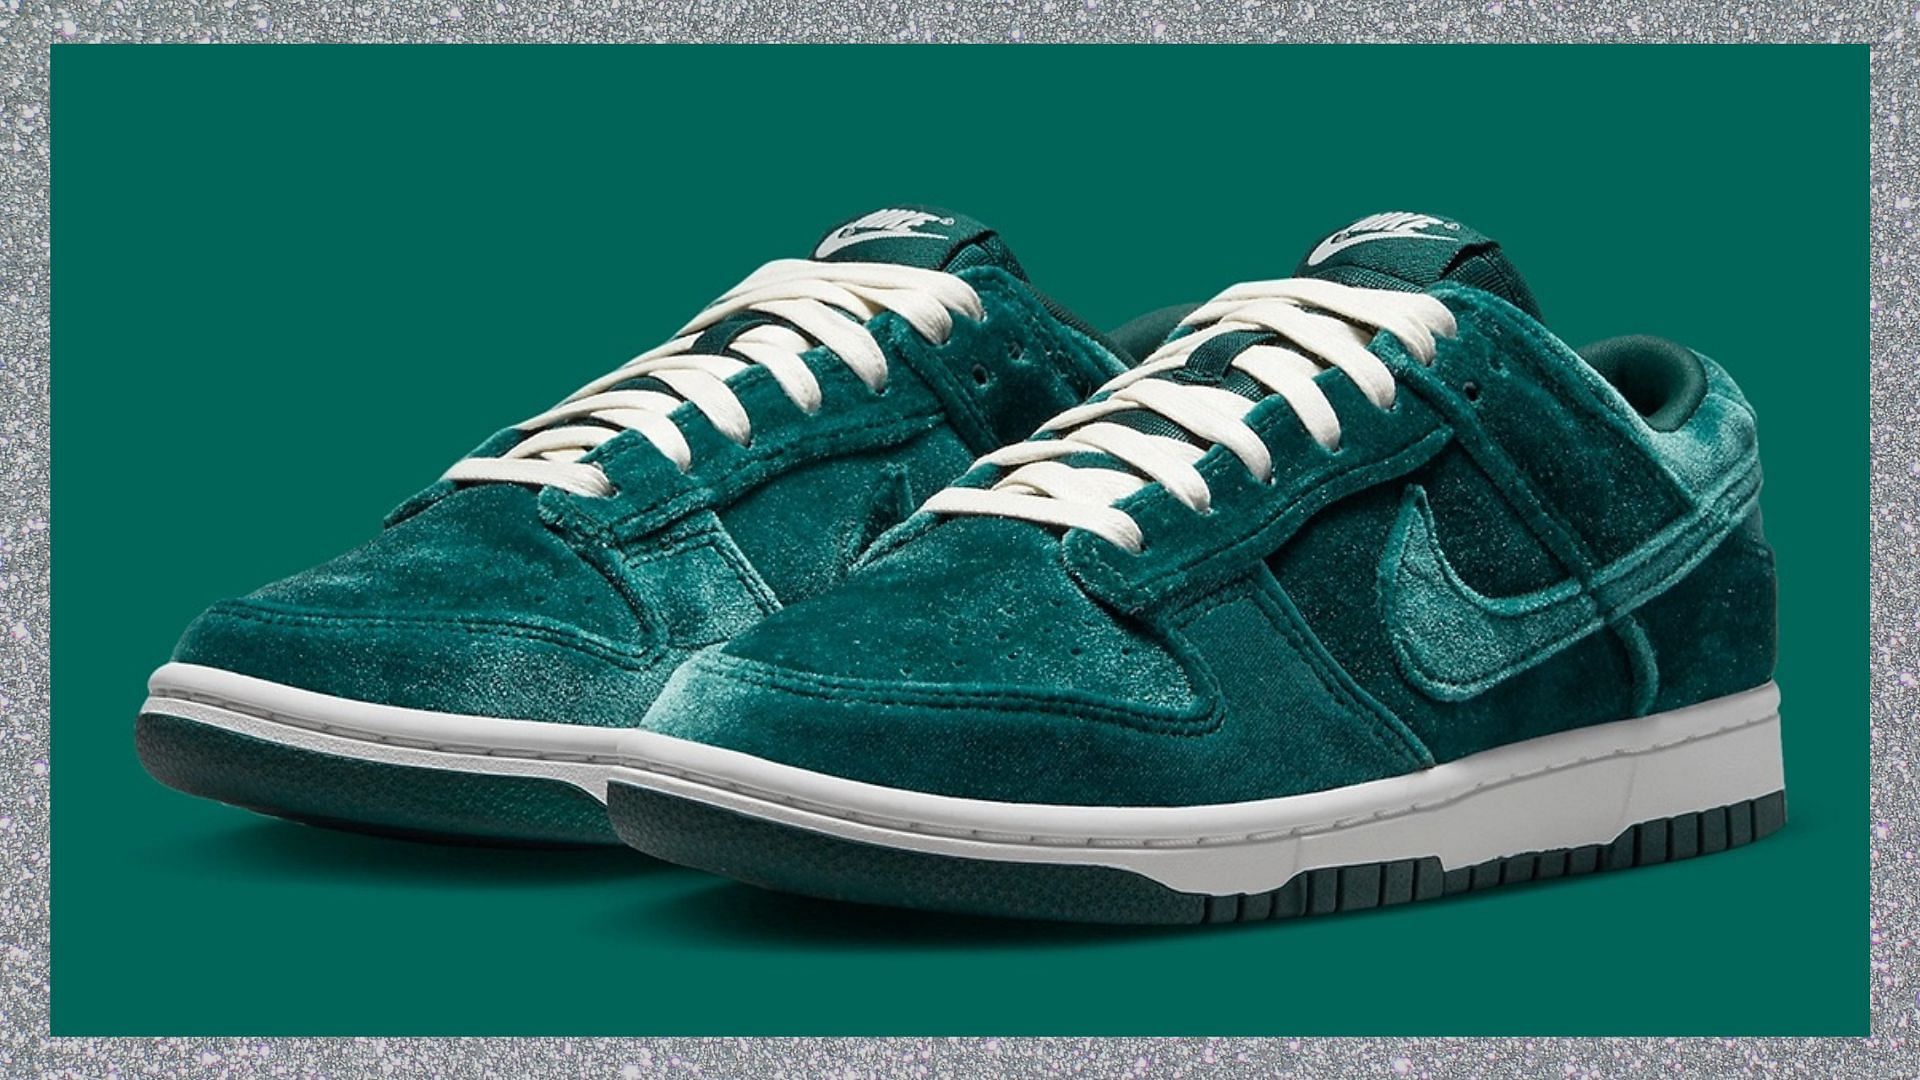 Where to buy Nike Dunk Low Green Velvet colorway? Price and more